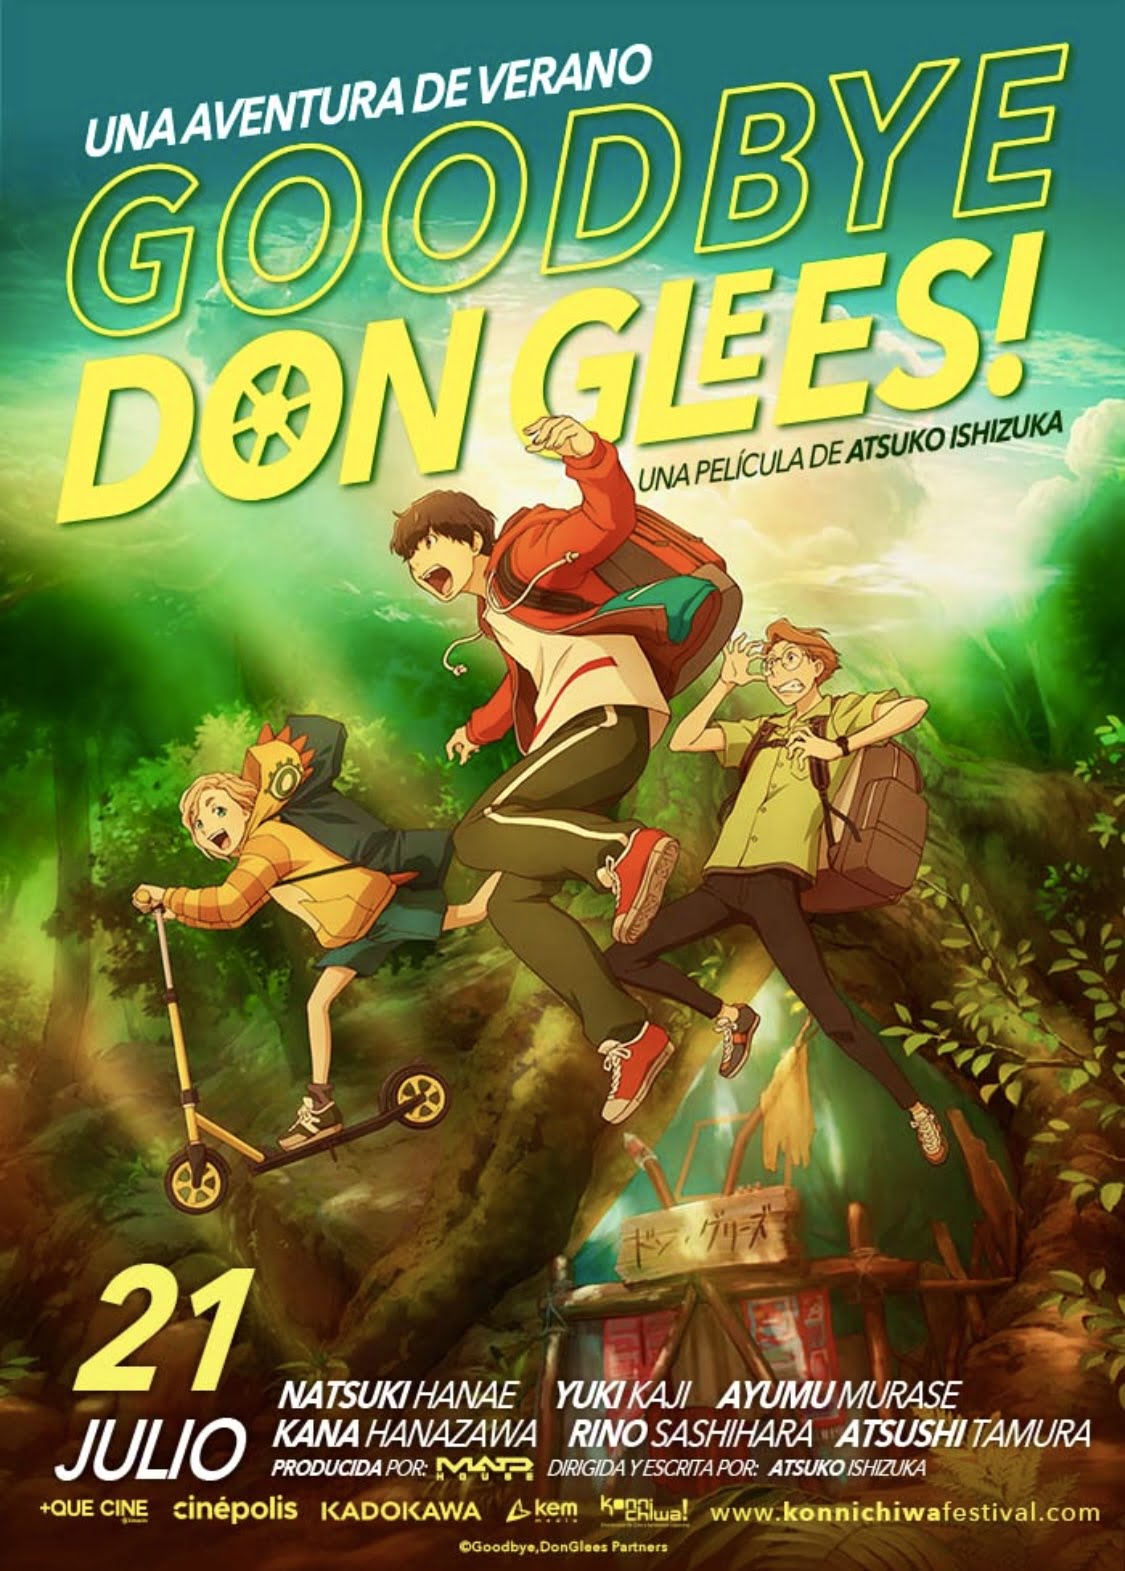  Goodbye, Don Glees! Movie 2022, Official Trailer, Release Date